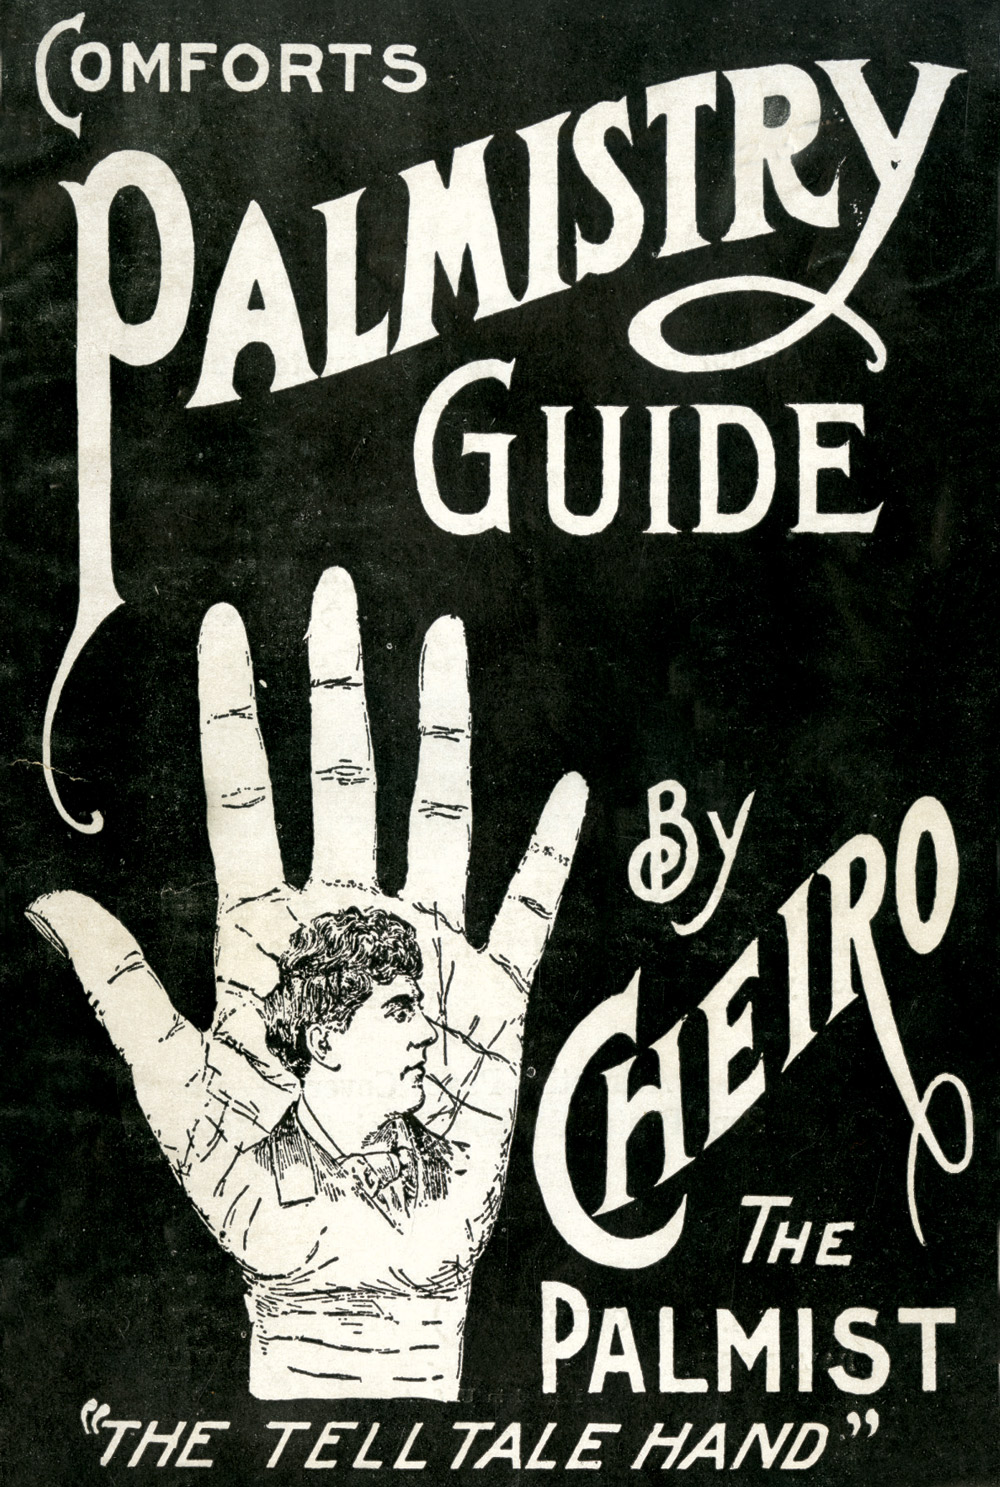 Cheiro, Comforts Palmistry Guide, 1900. Courtesy George Peabody Library, Johns Hopkins University.